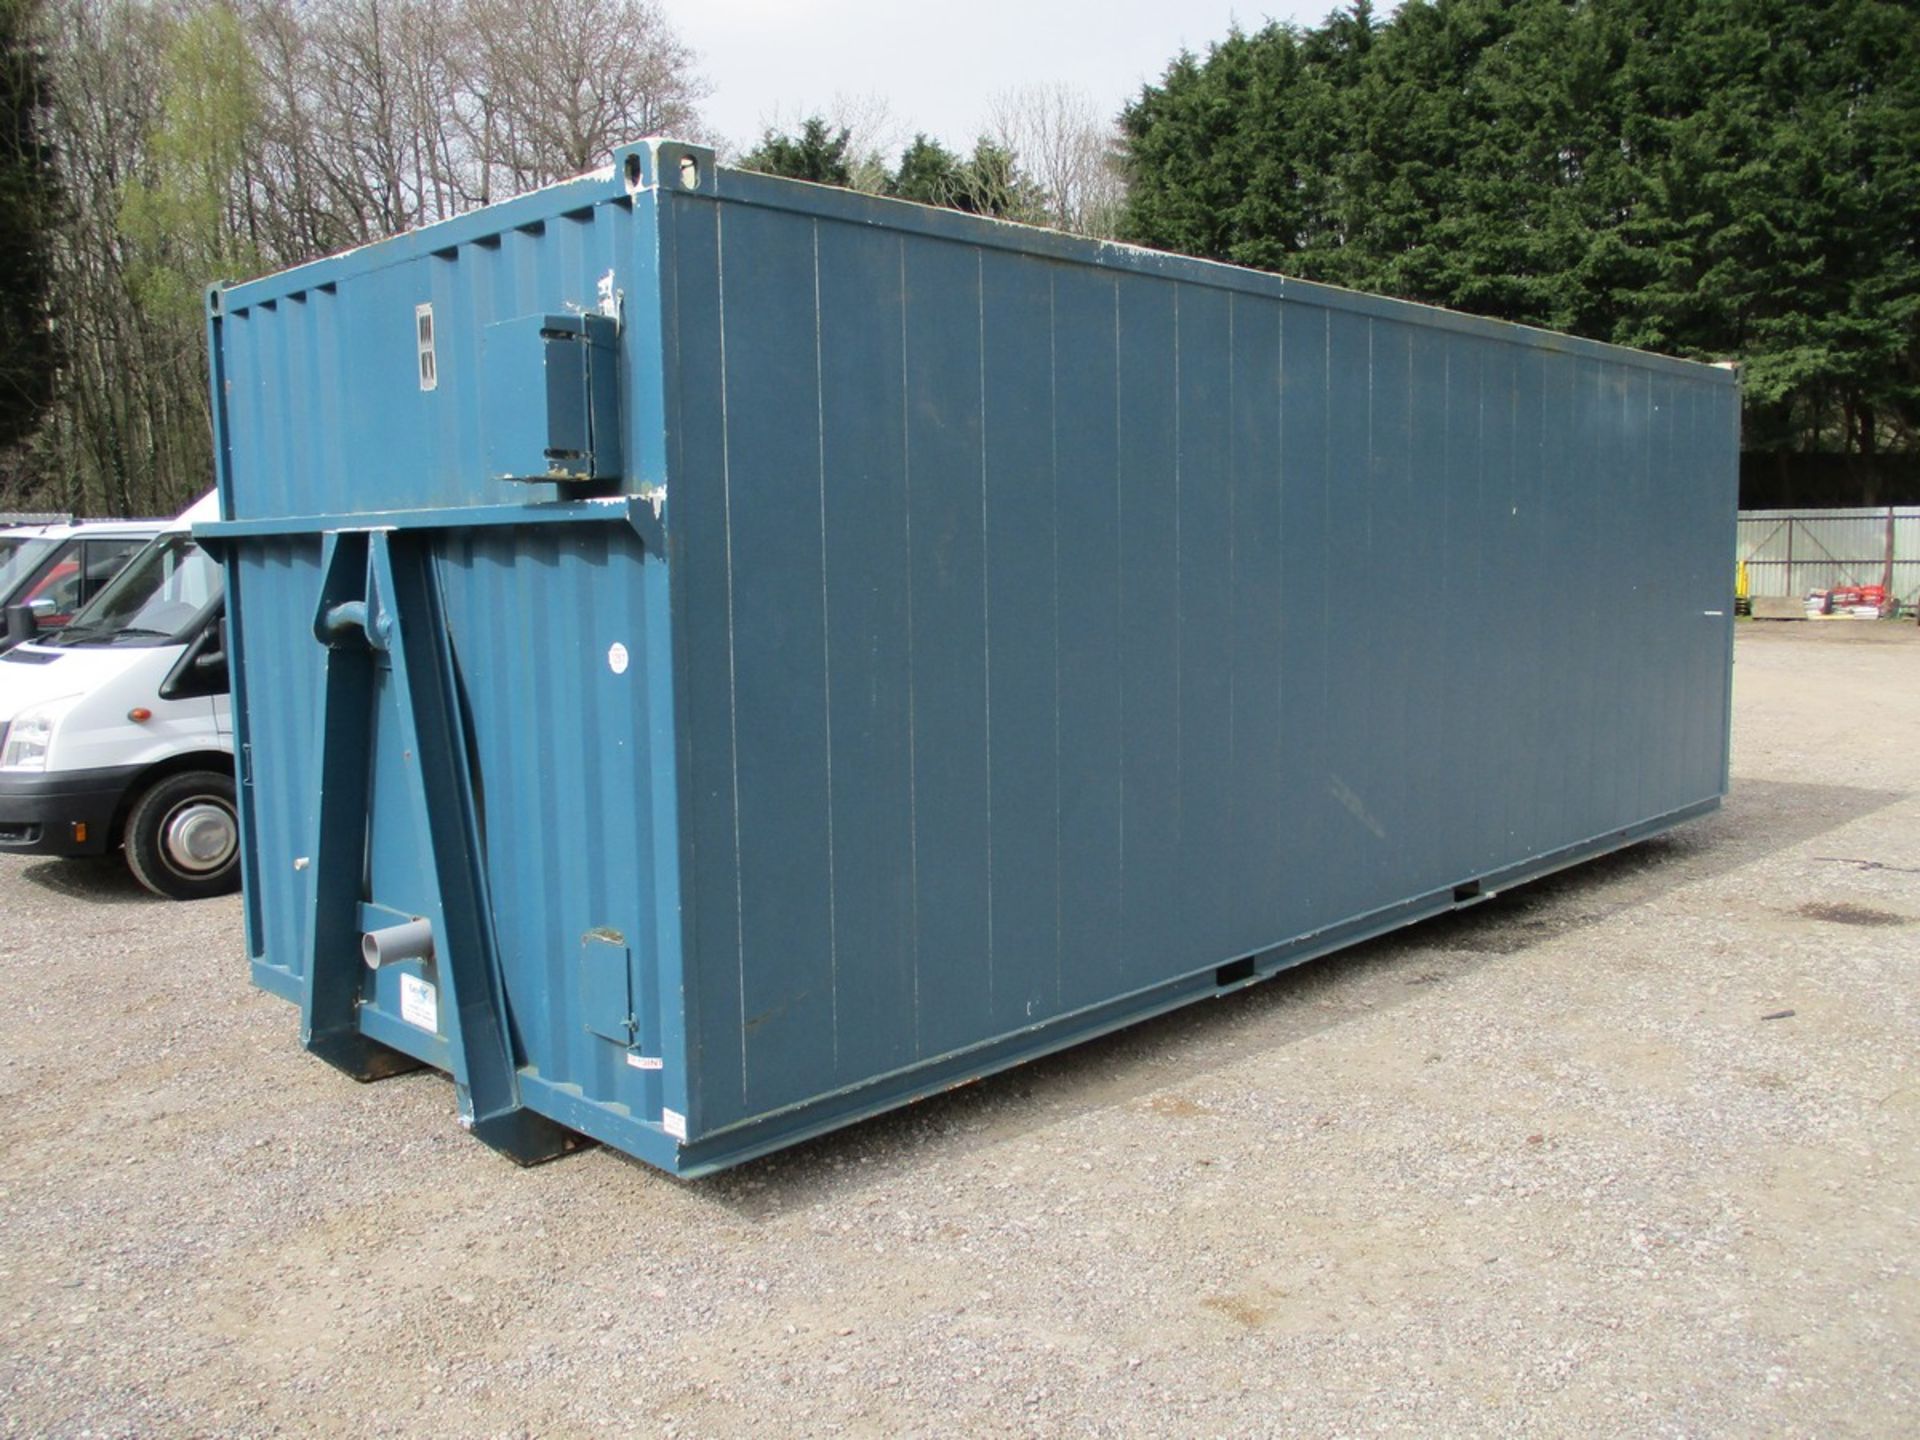 EASYCABIN WELFARE CONTAINER (BUYER TO SEND HIAB TO LOAD)